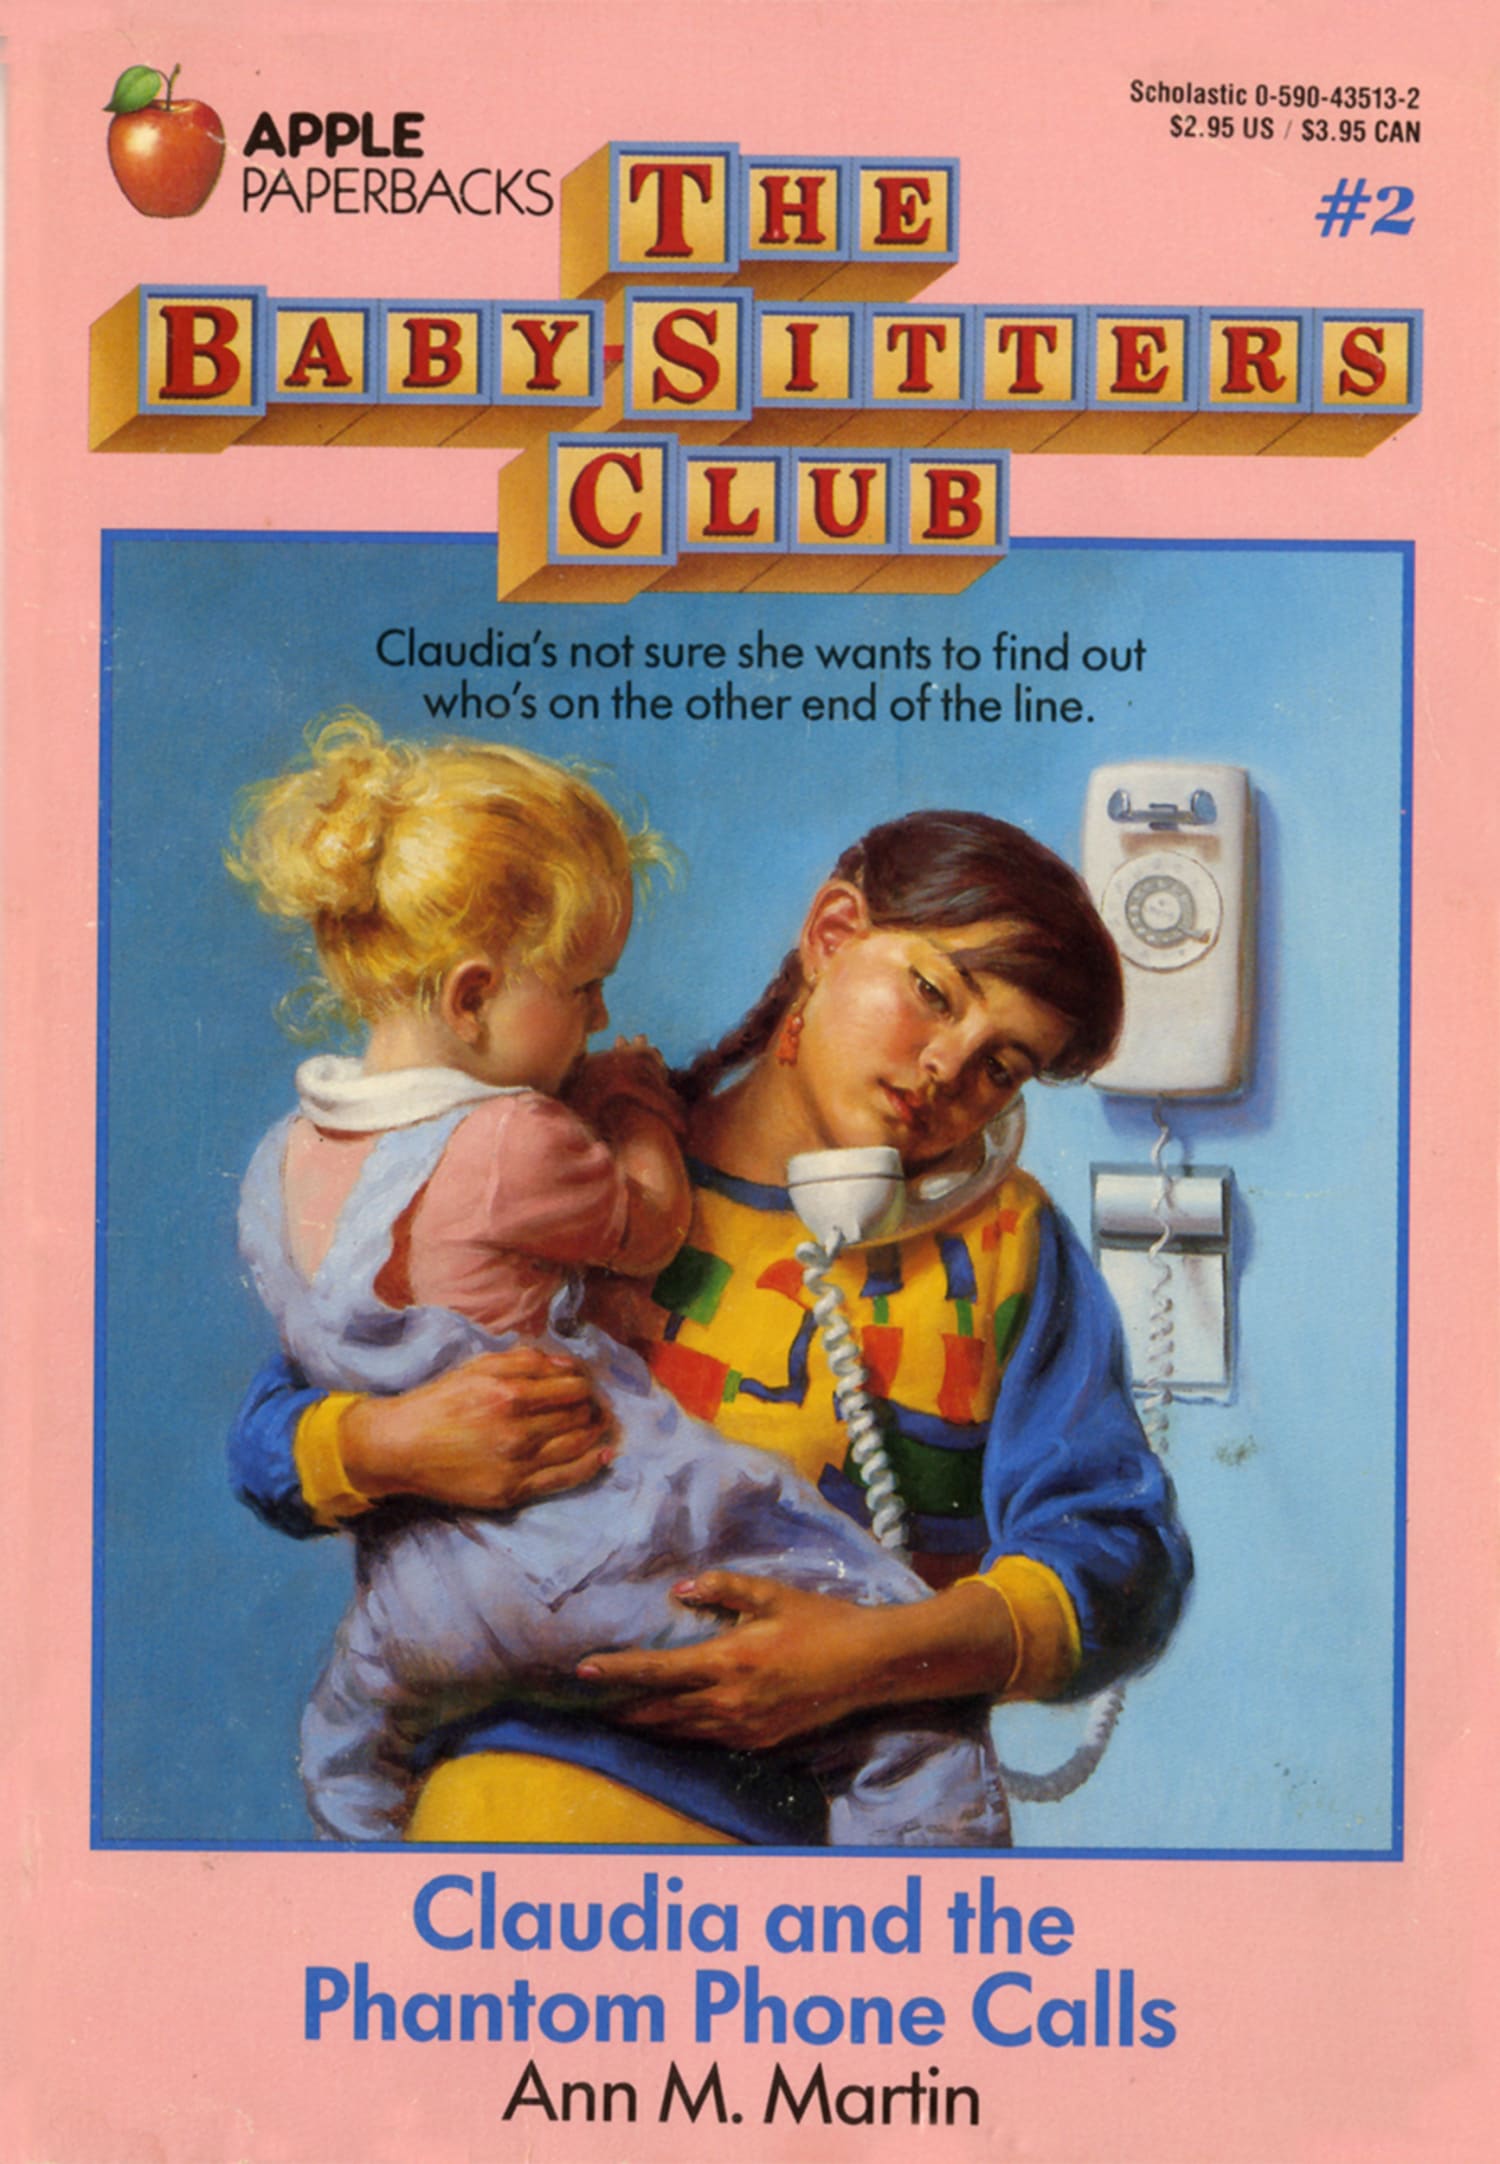 https://media-cldnry.s-nbcnews.com/image/upload/newscms/2016_33/1150676/the-babysitters-club-book-inline-today-160815.jpg